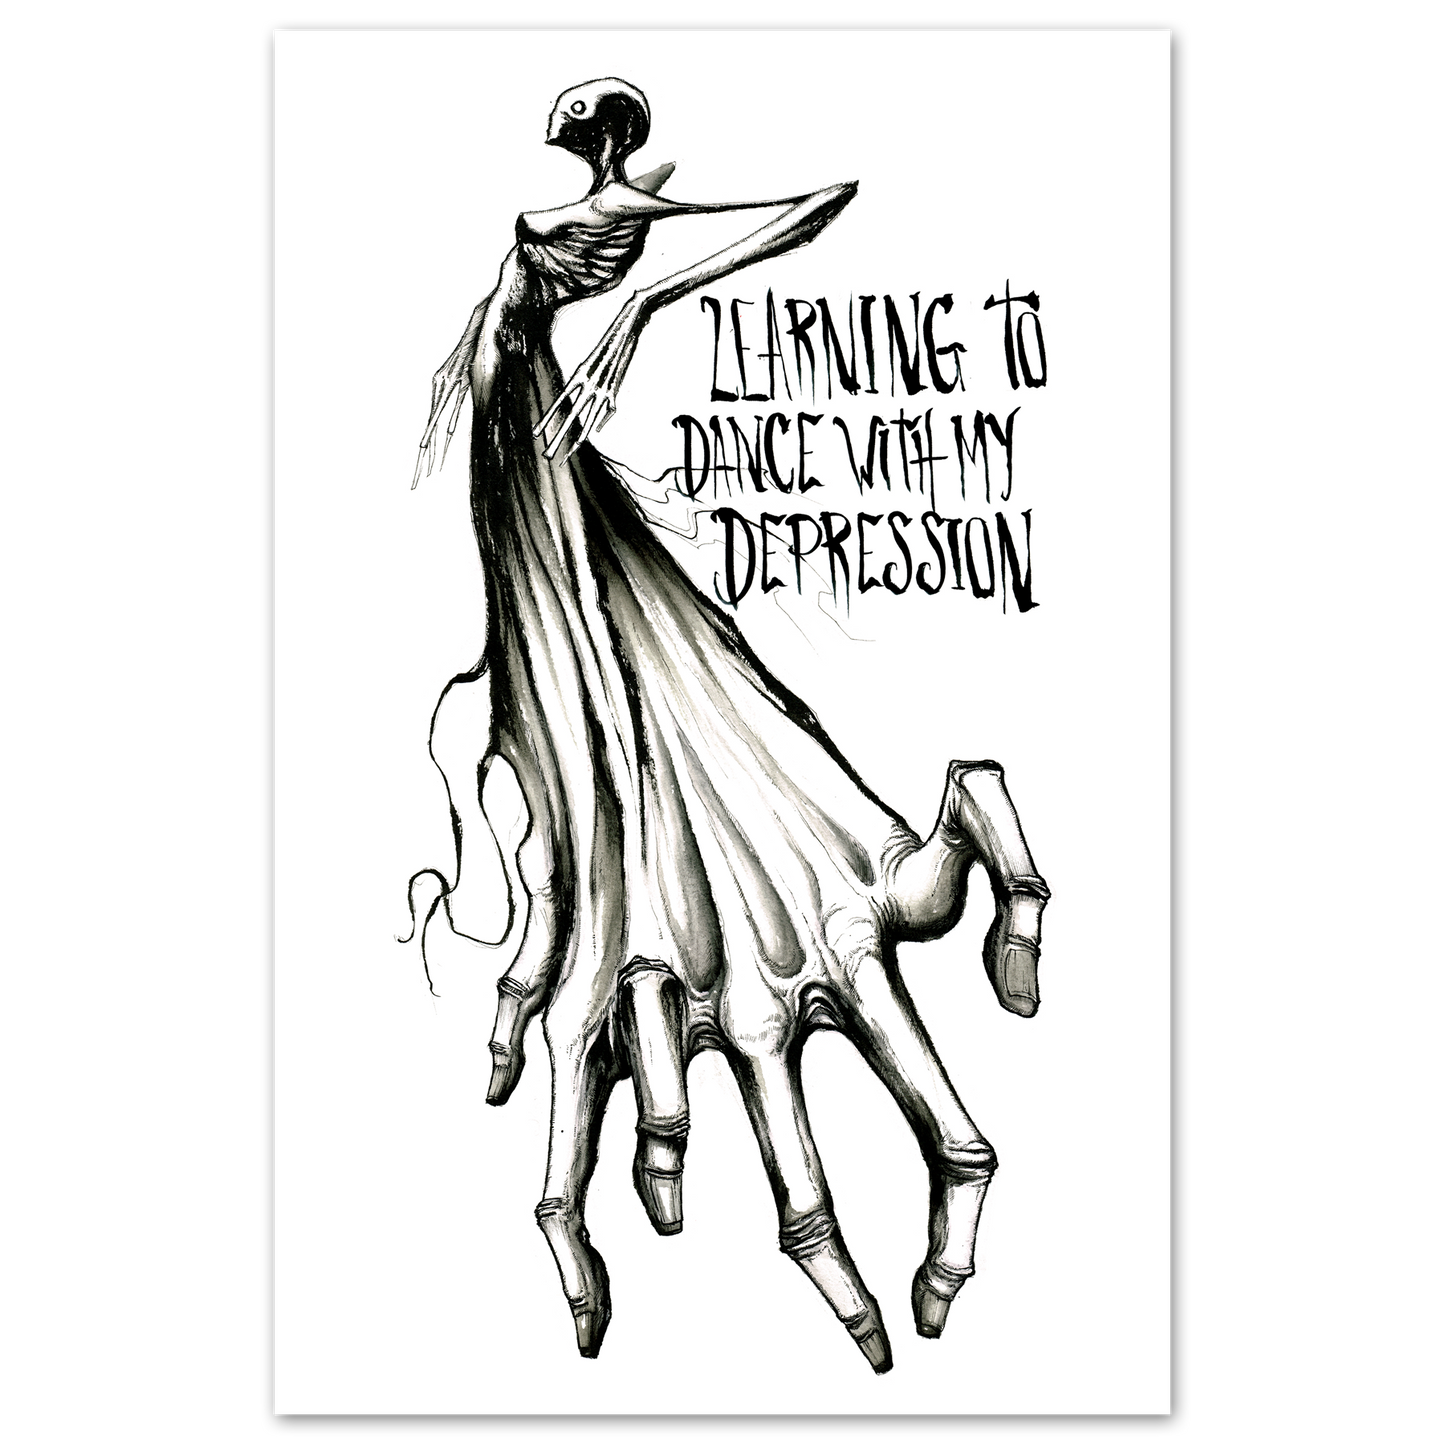 any means necessary shawn coss learning to dance with my depression 11x17 poster print